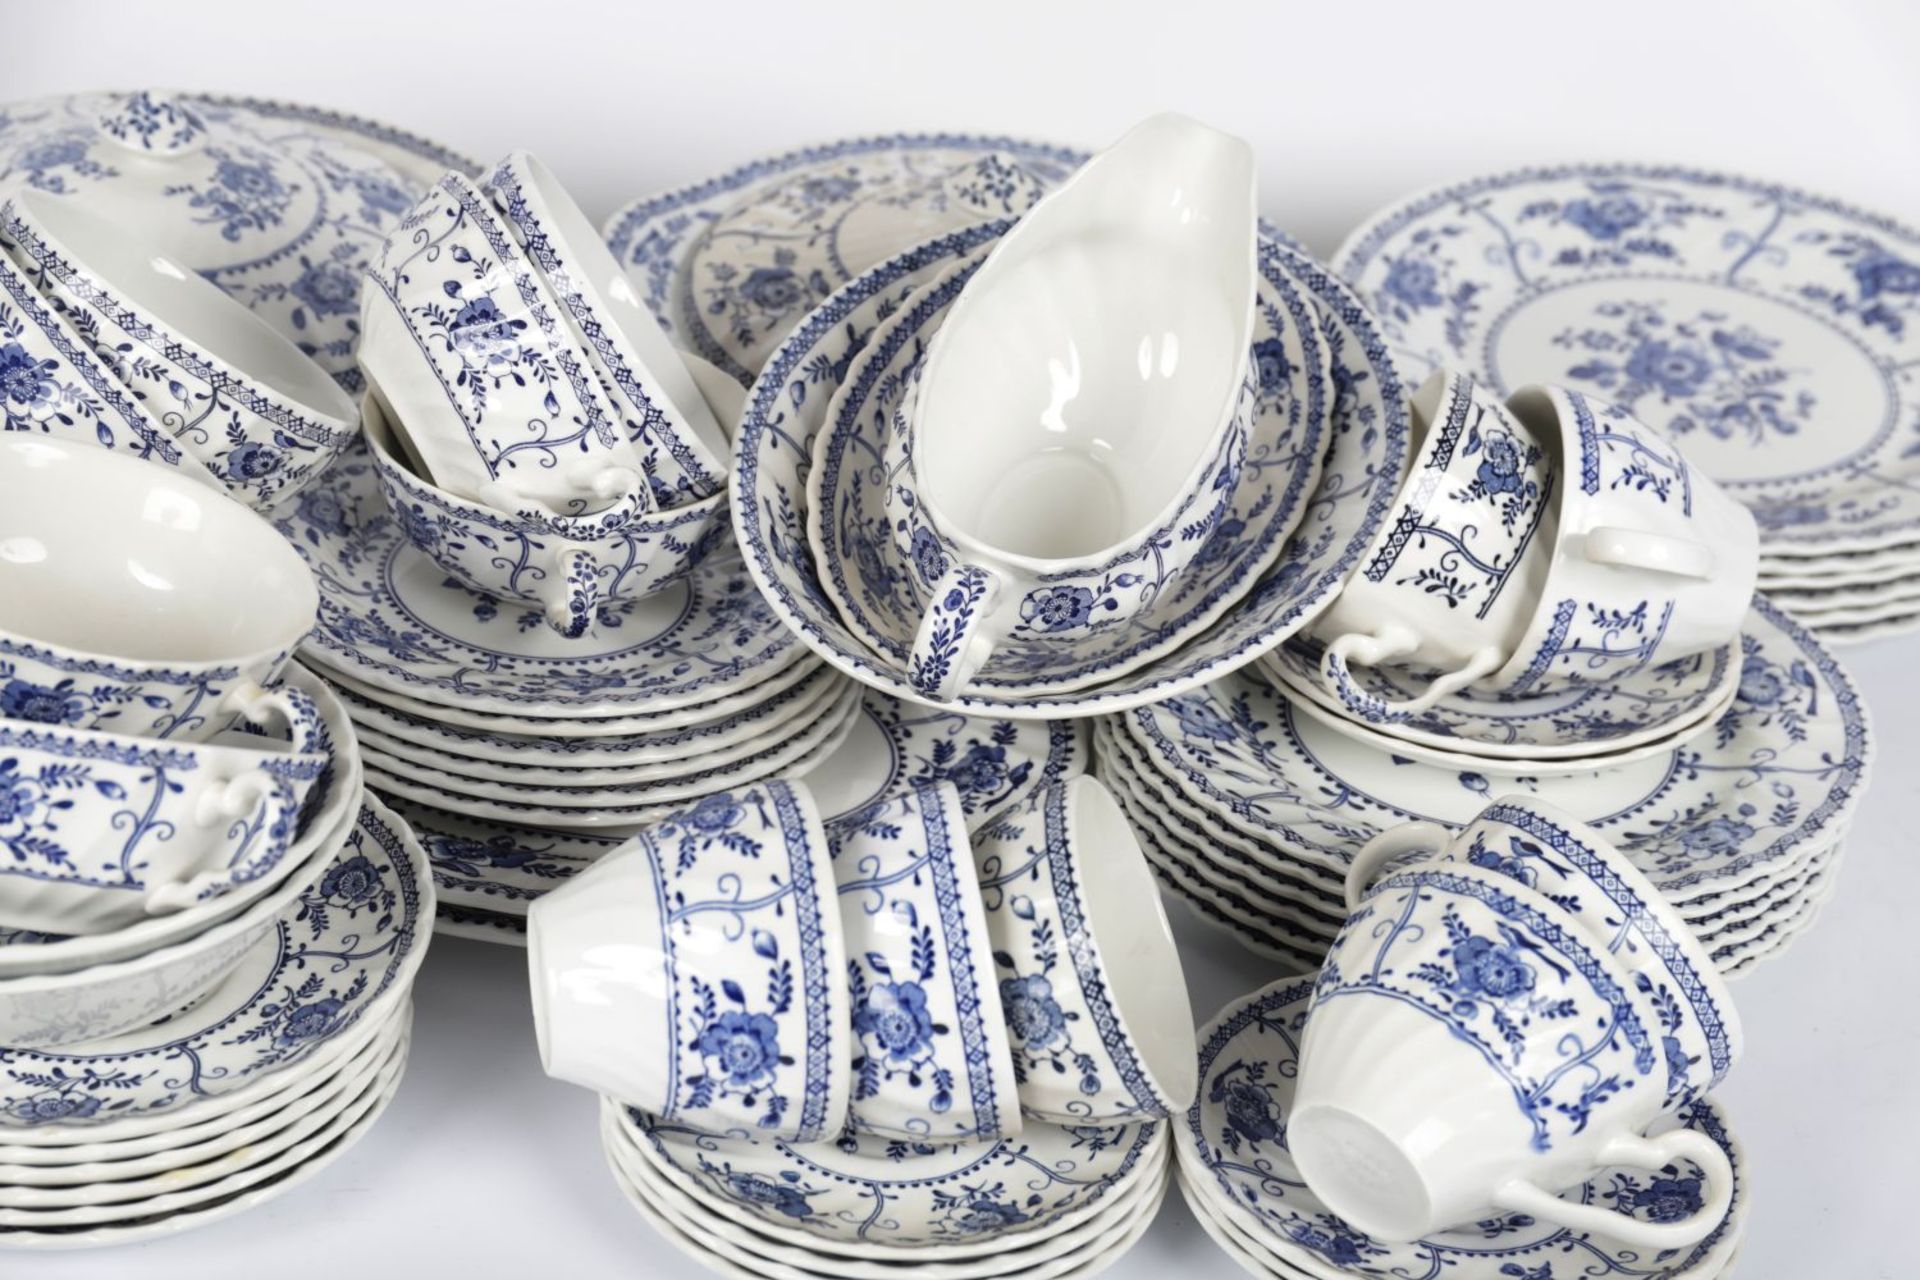 74 PIECE BLUE & WHITE DINNER SERVICE - Image 2 of 3